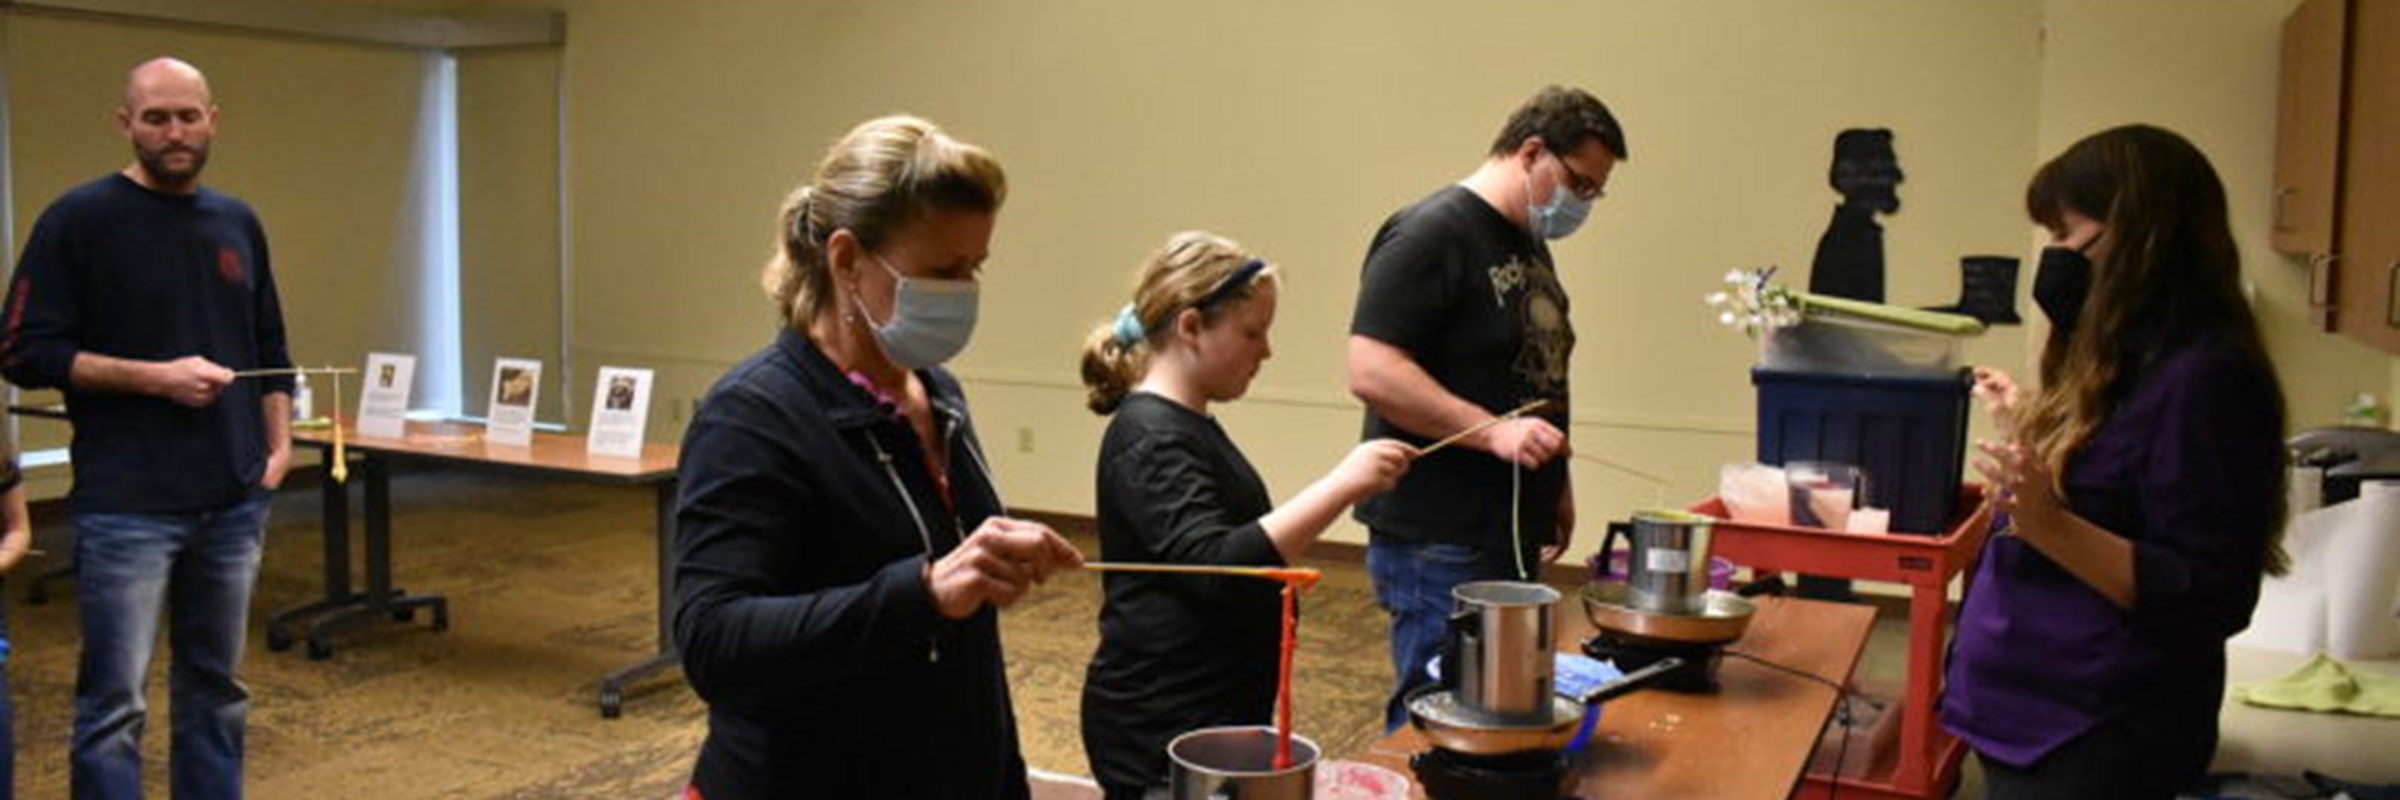 Candlemaking at the Museum of the Grand Prairie